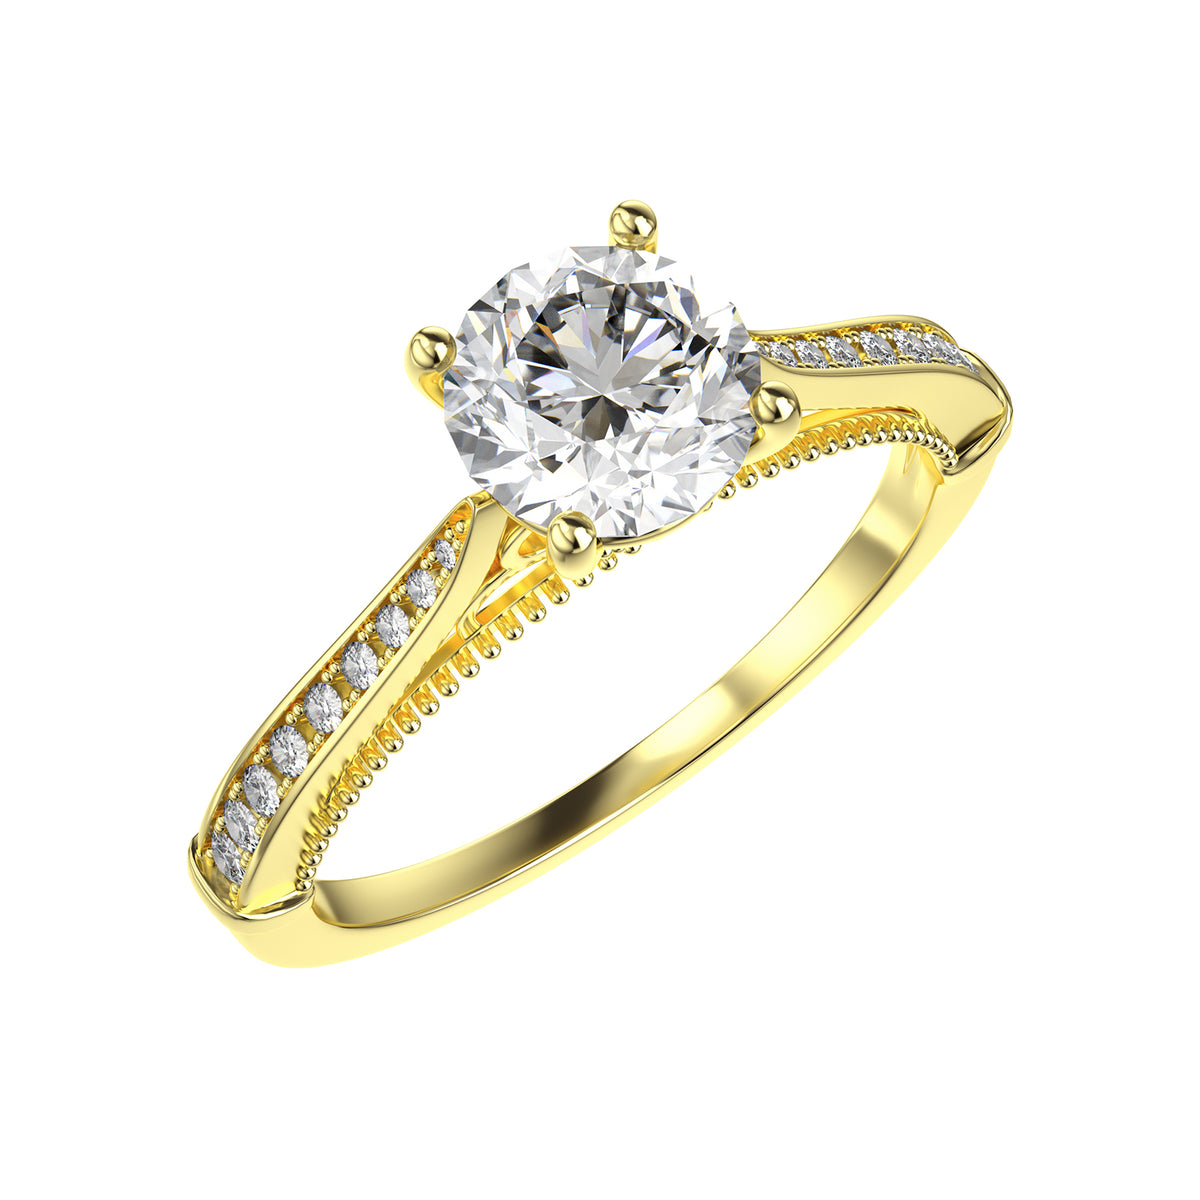 1 Row Detailed Accented Round Cut Moissanite Diamond Ring in Yellow/White Gold